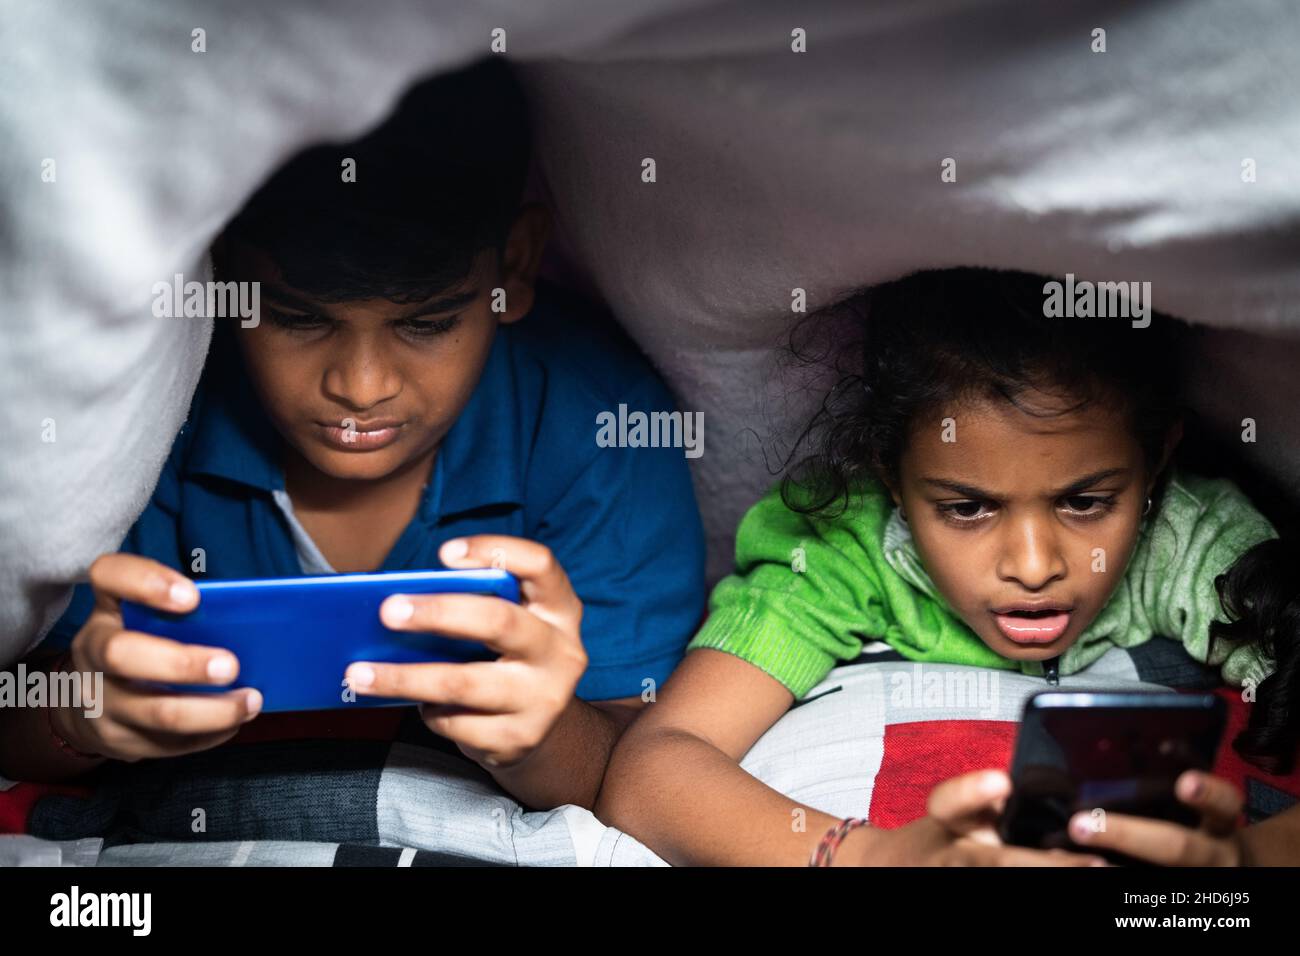 Kids busy playing video game on mobile phone at night under the bedsheet - concept smartphone and technology addiction, unhealthy childhood lifestyle Stock Photo